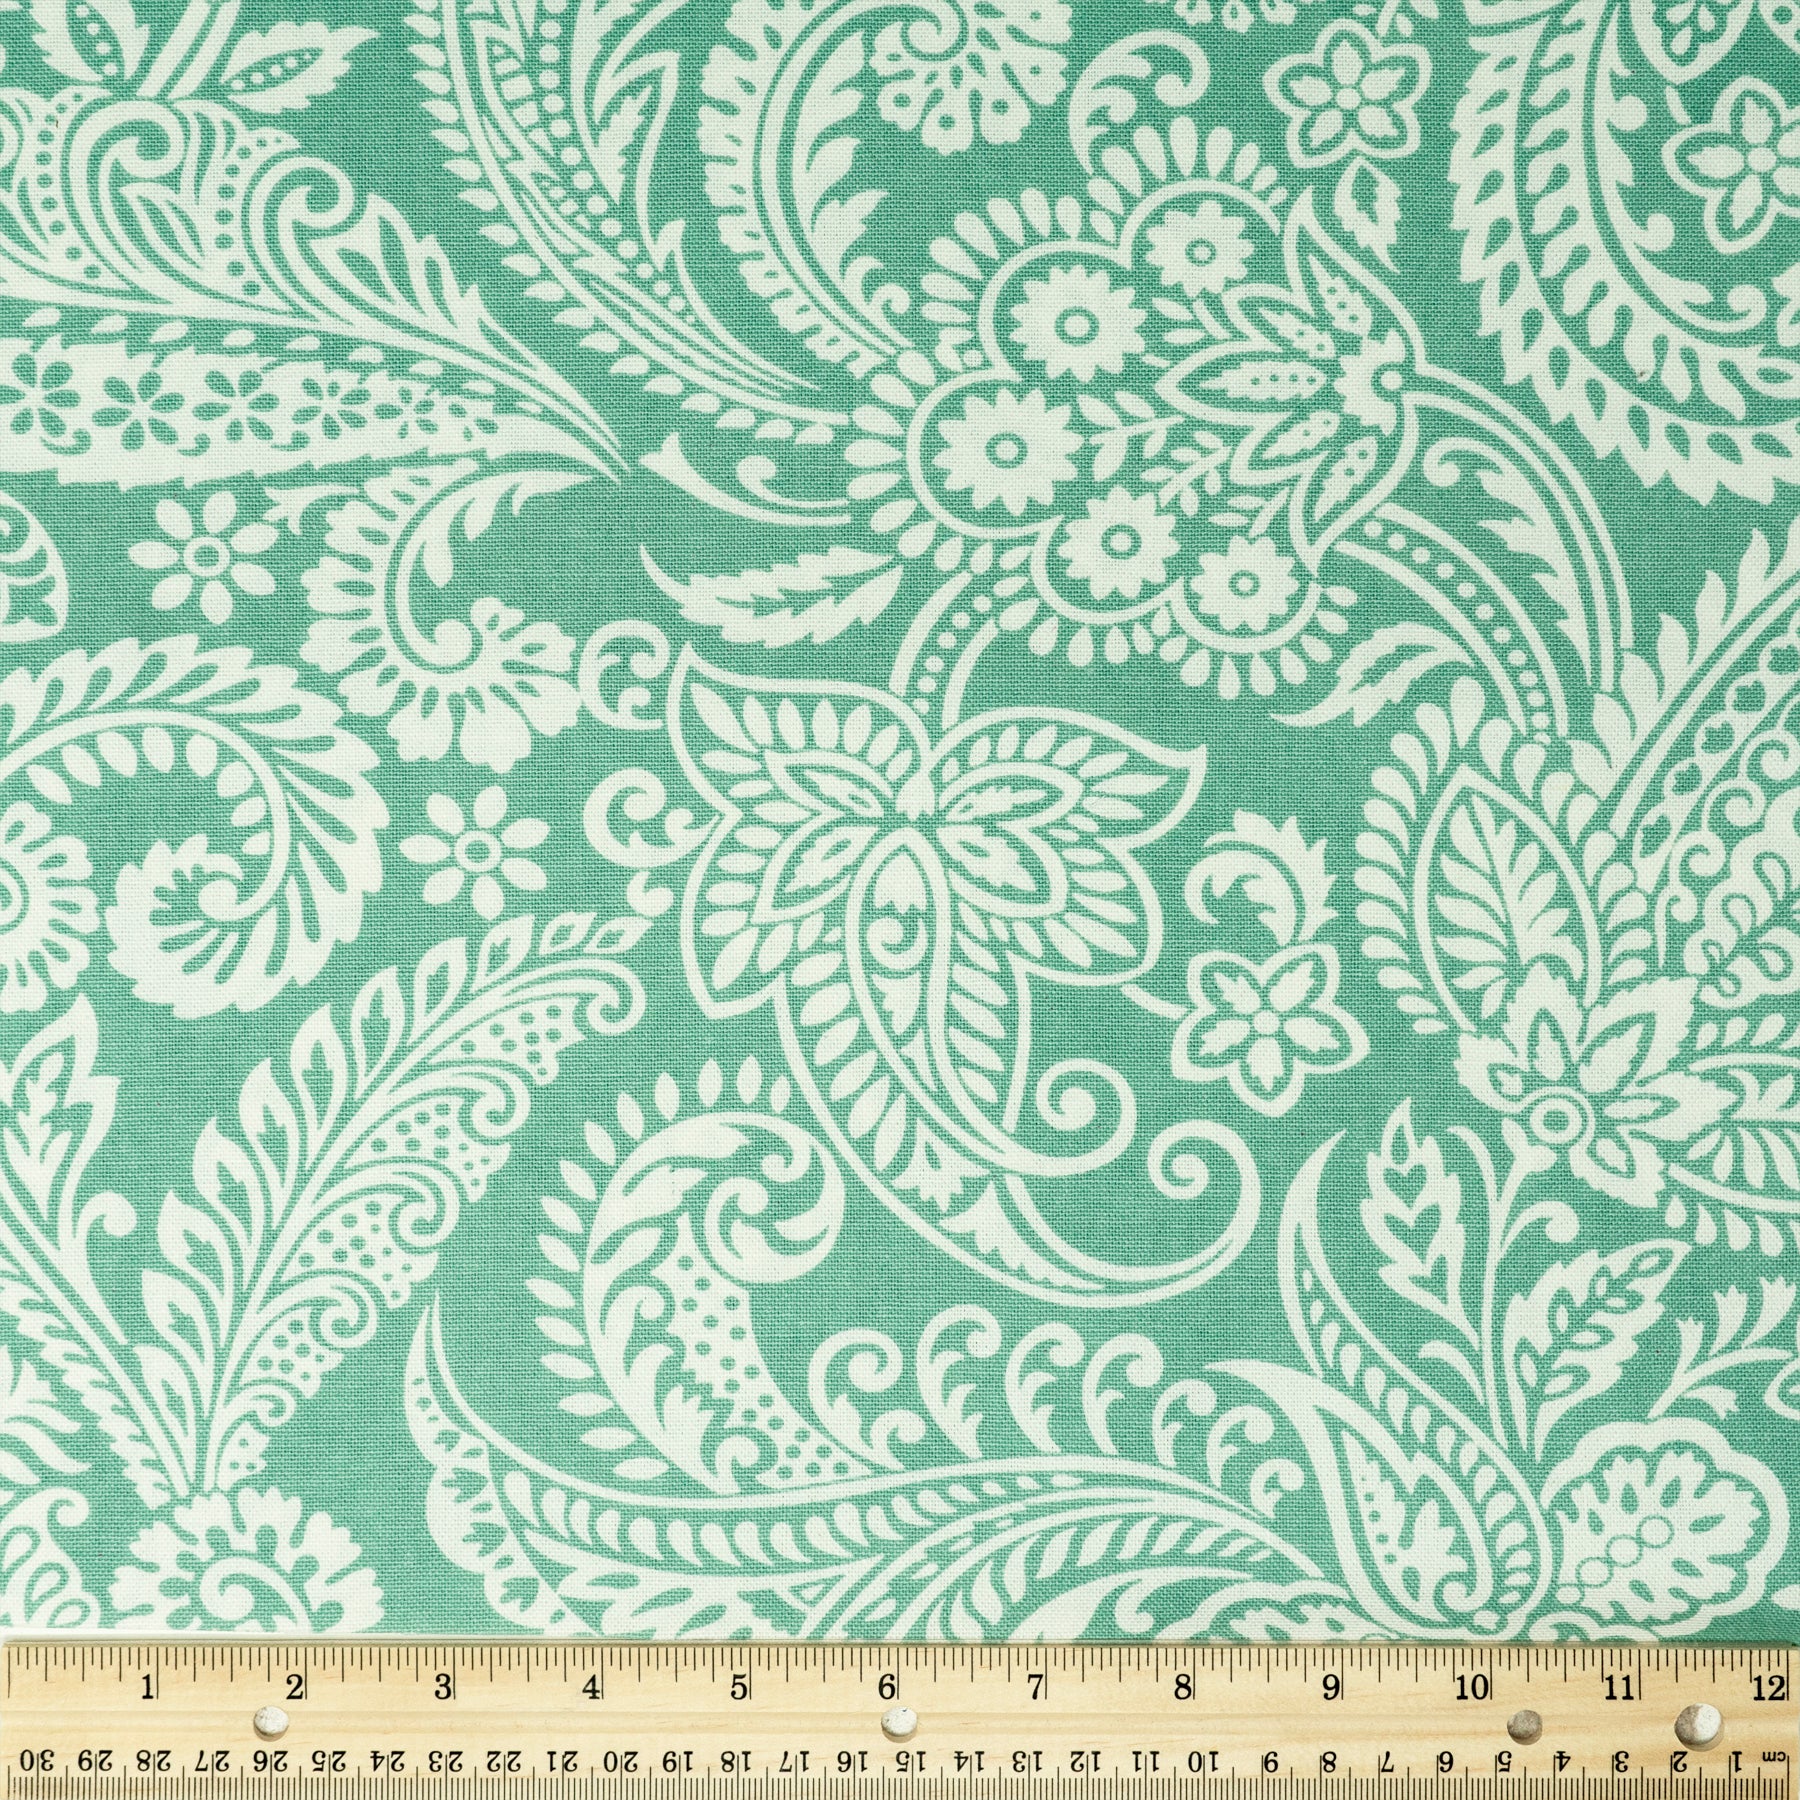 Waverly Inspirations Cotton Duck 54" Graphics Paisley Aqua Color Sewing Fabric by the Yard